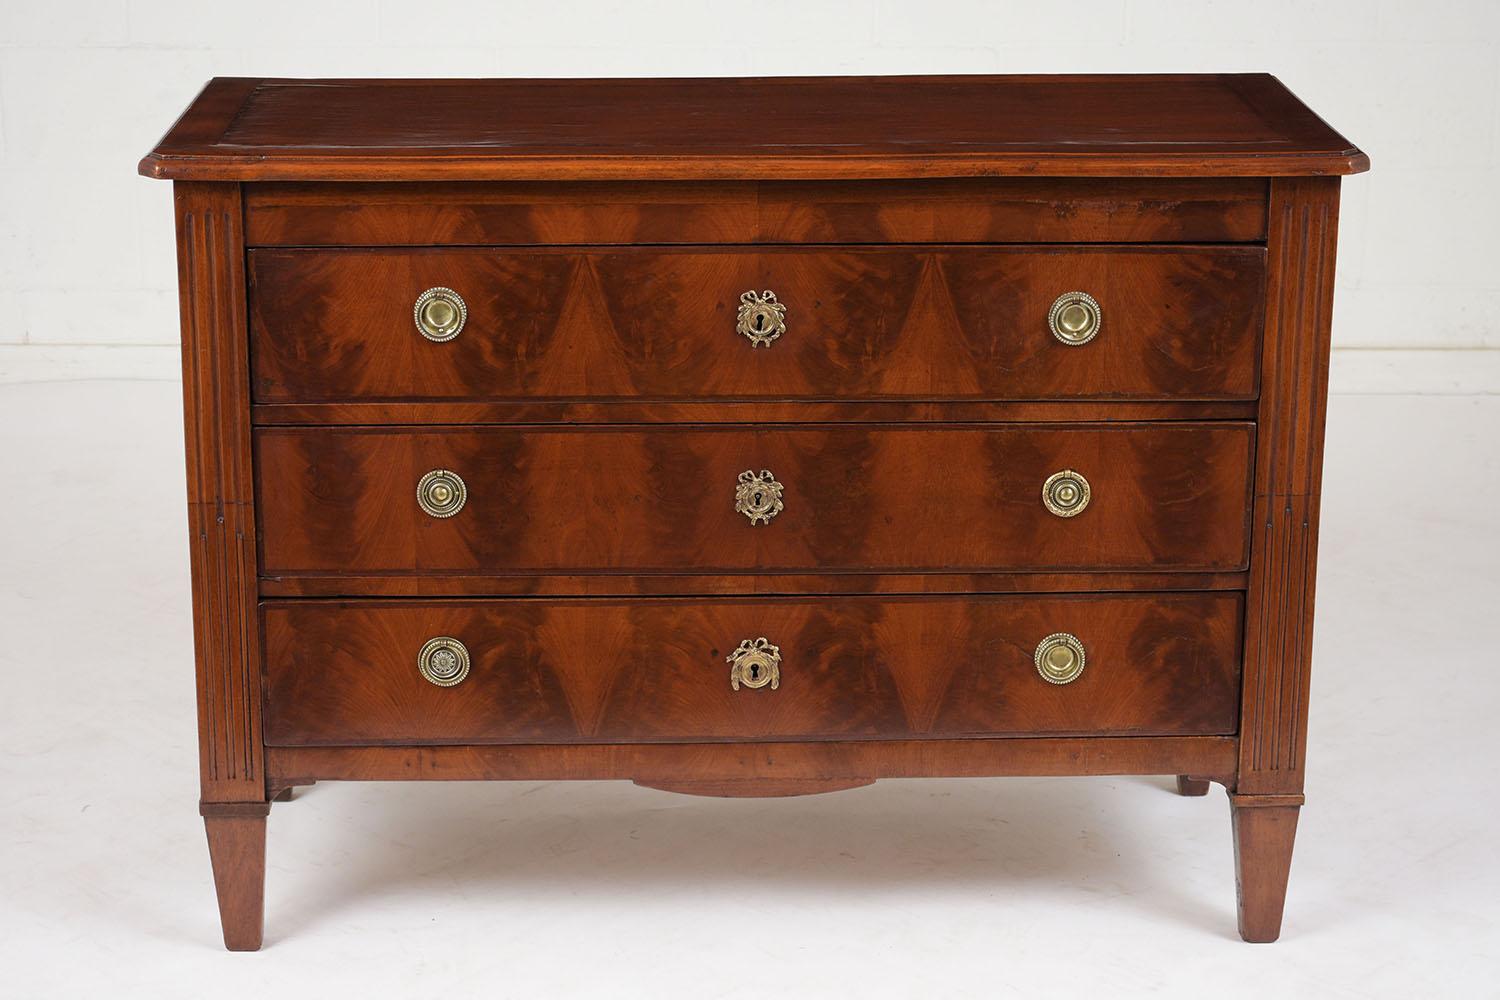 This 1850s French Louis XVI Style Commode is made of mahogany wood finished in a rich color stain with a polished finish and is in good condition. The dresser features a wooden top with a beveled edge, three drawers covered in veneers with inlaid